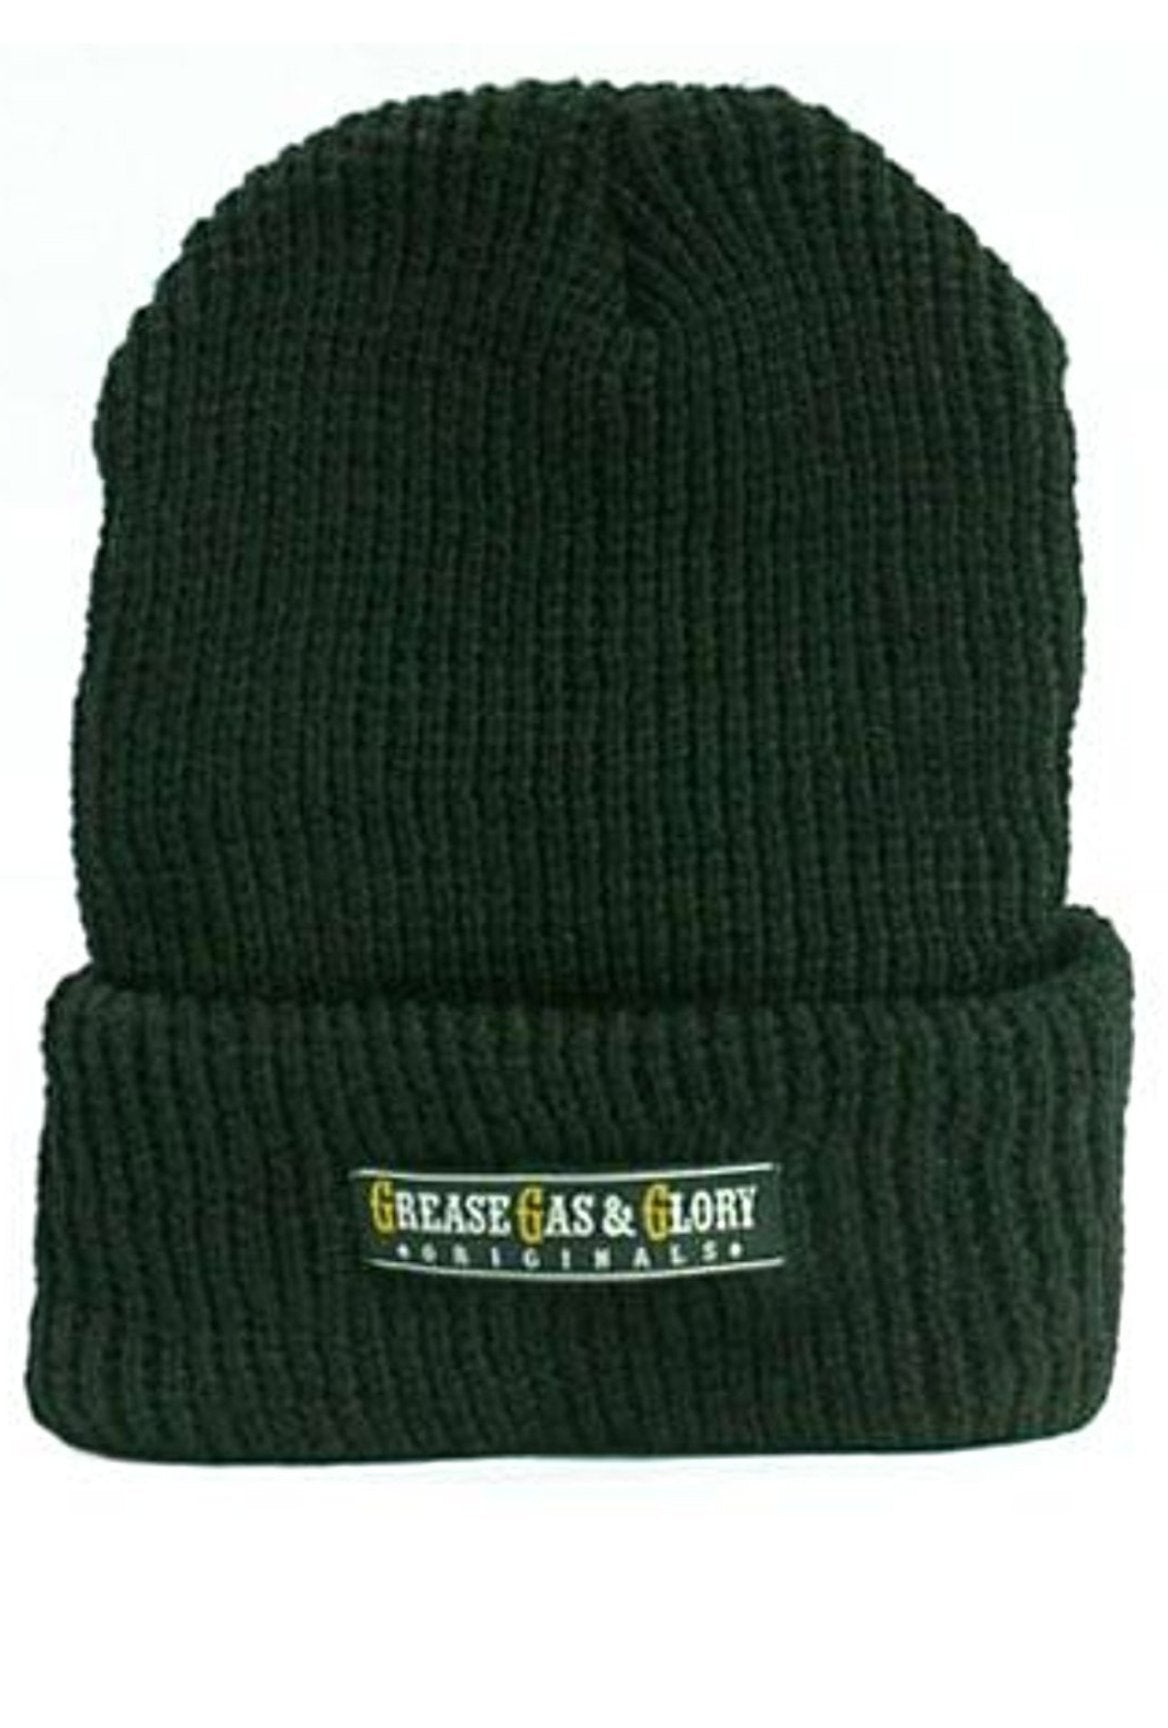 The GREASE GAS & GLORY Roll Beanie